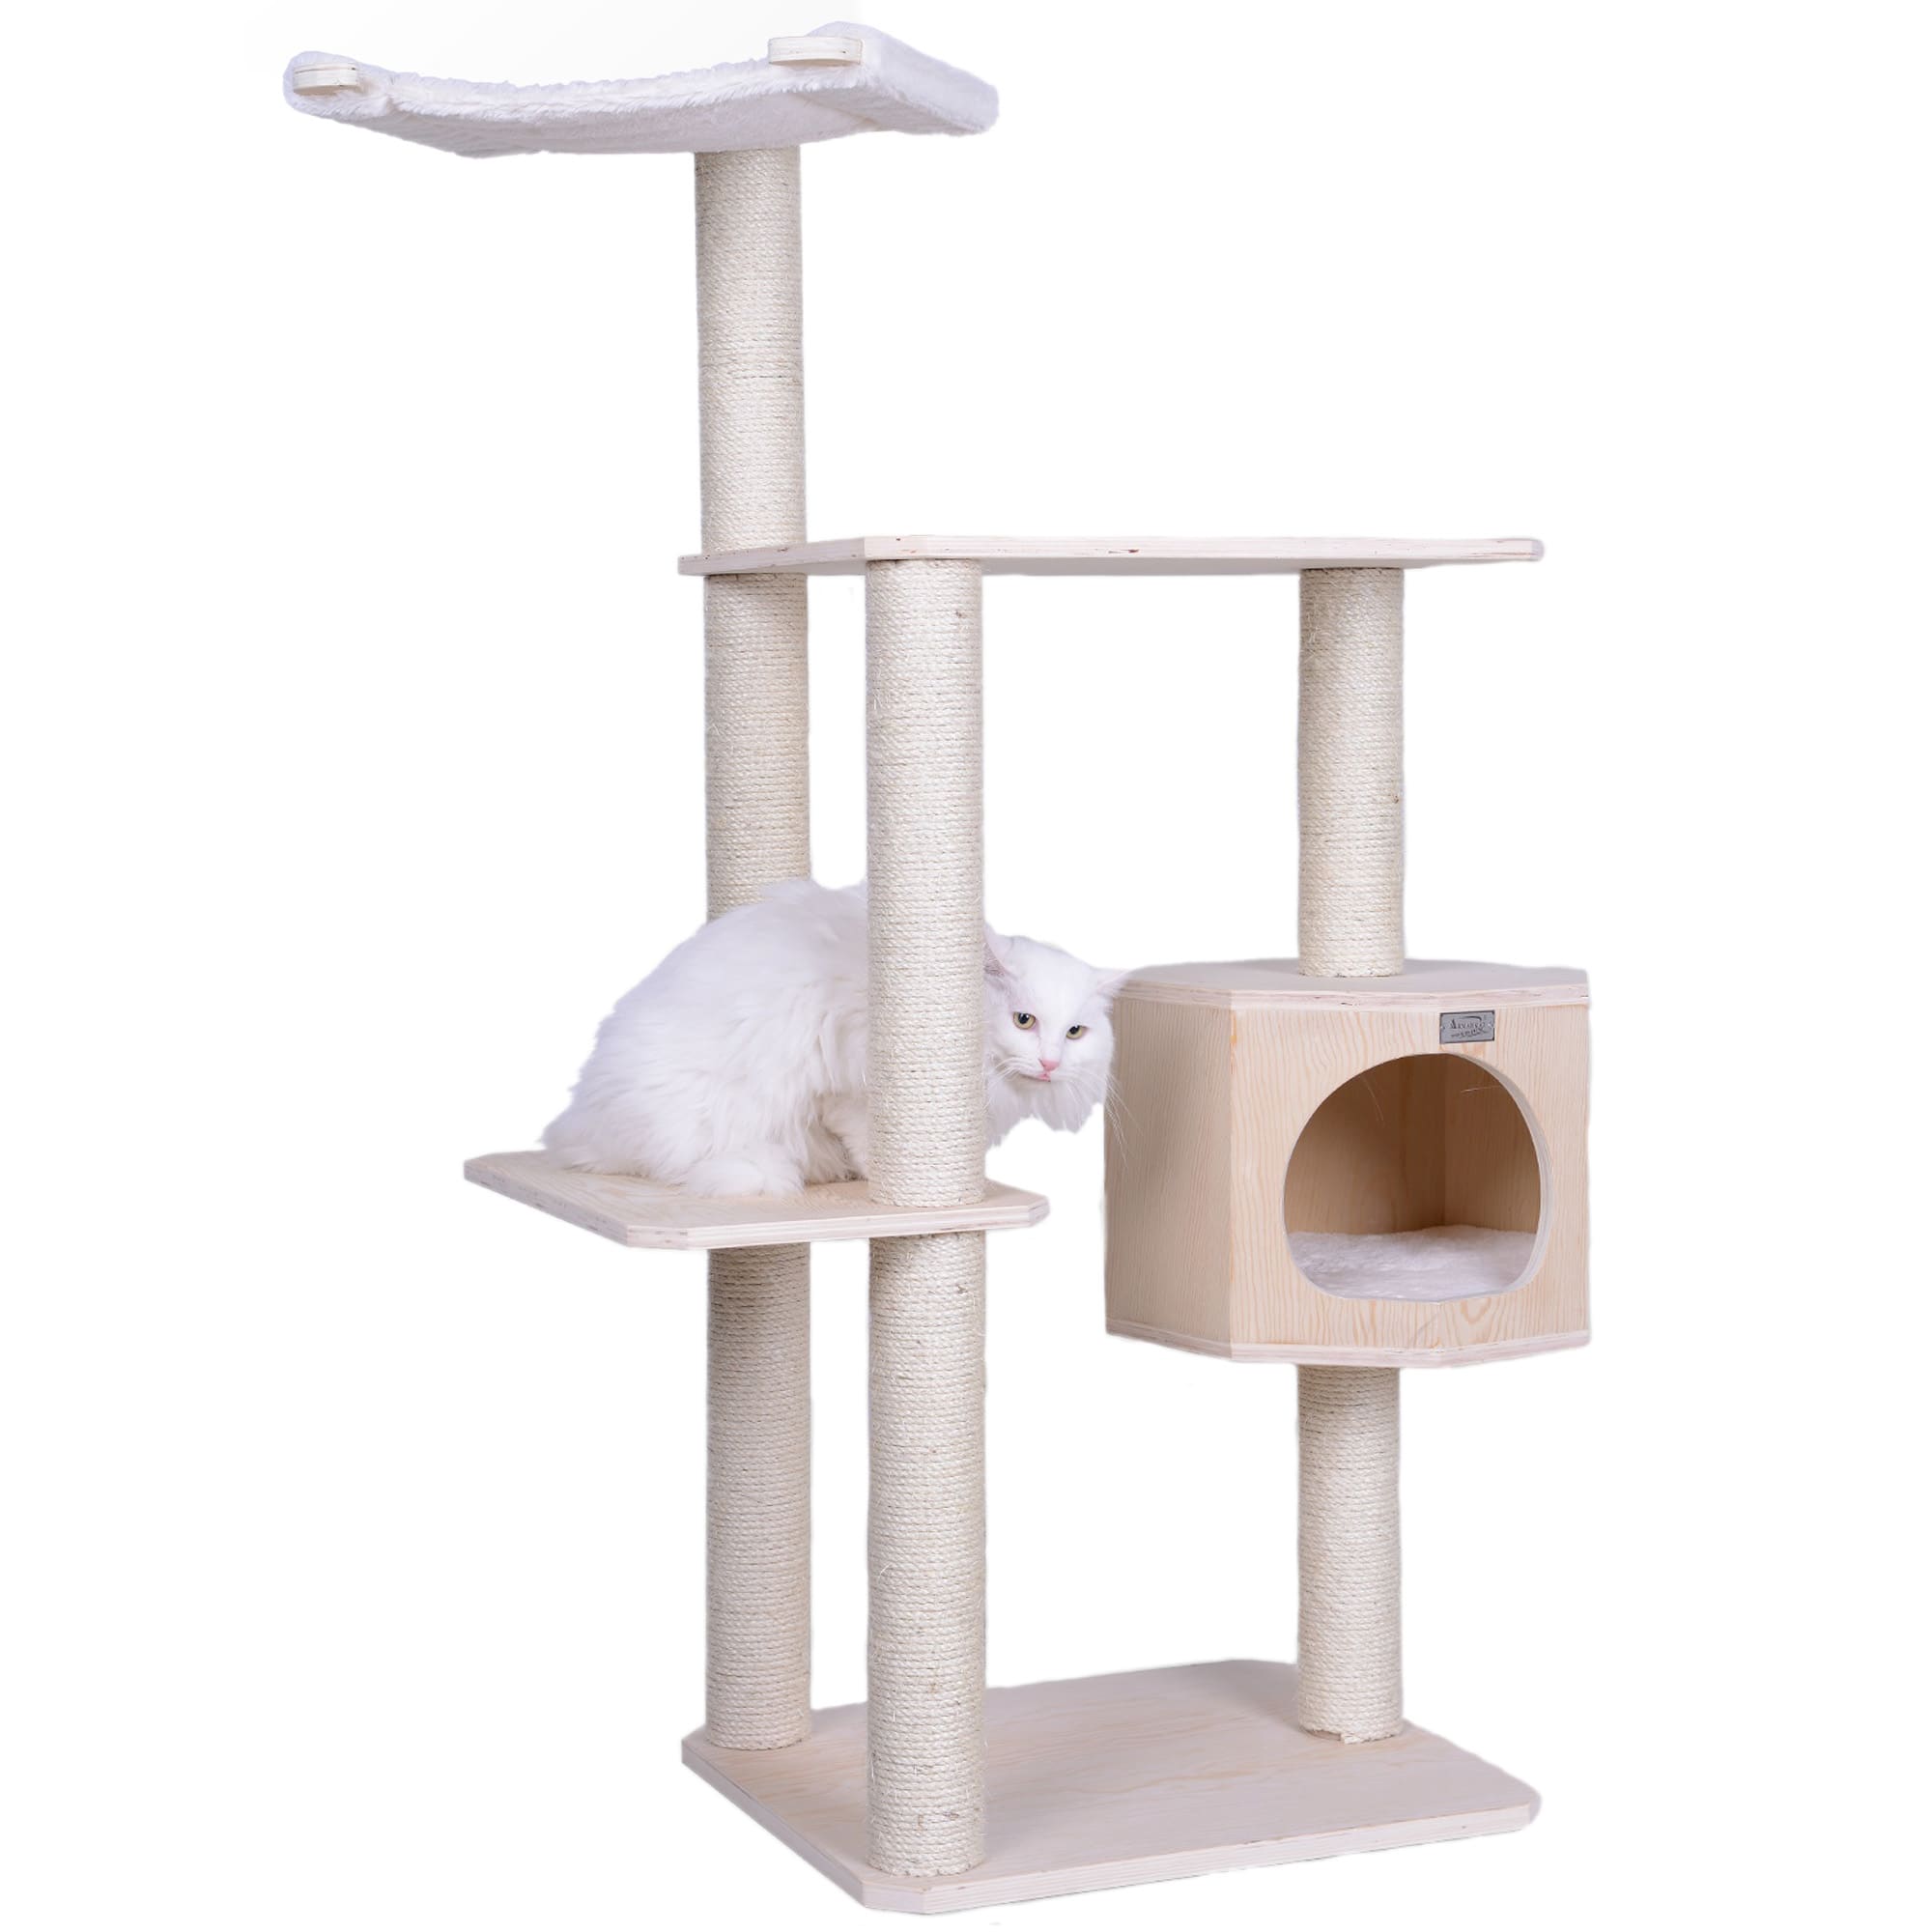 Photos - Other for Cats Armarkat Real Wood Premium Pinus Sylvestric Wood Cat Tree S5402, 